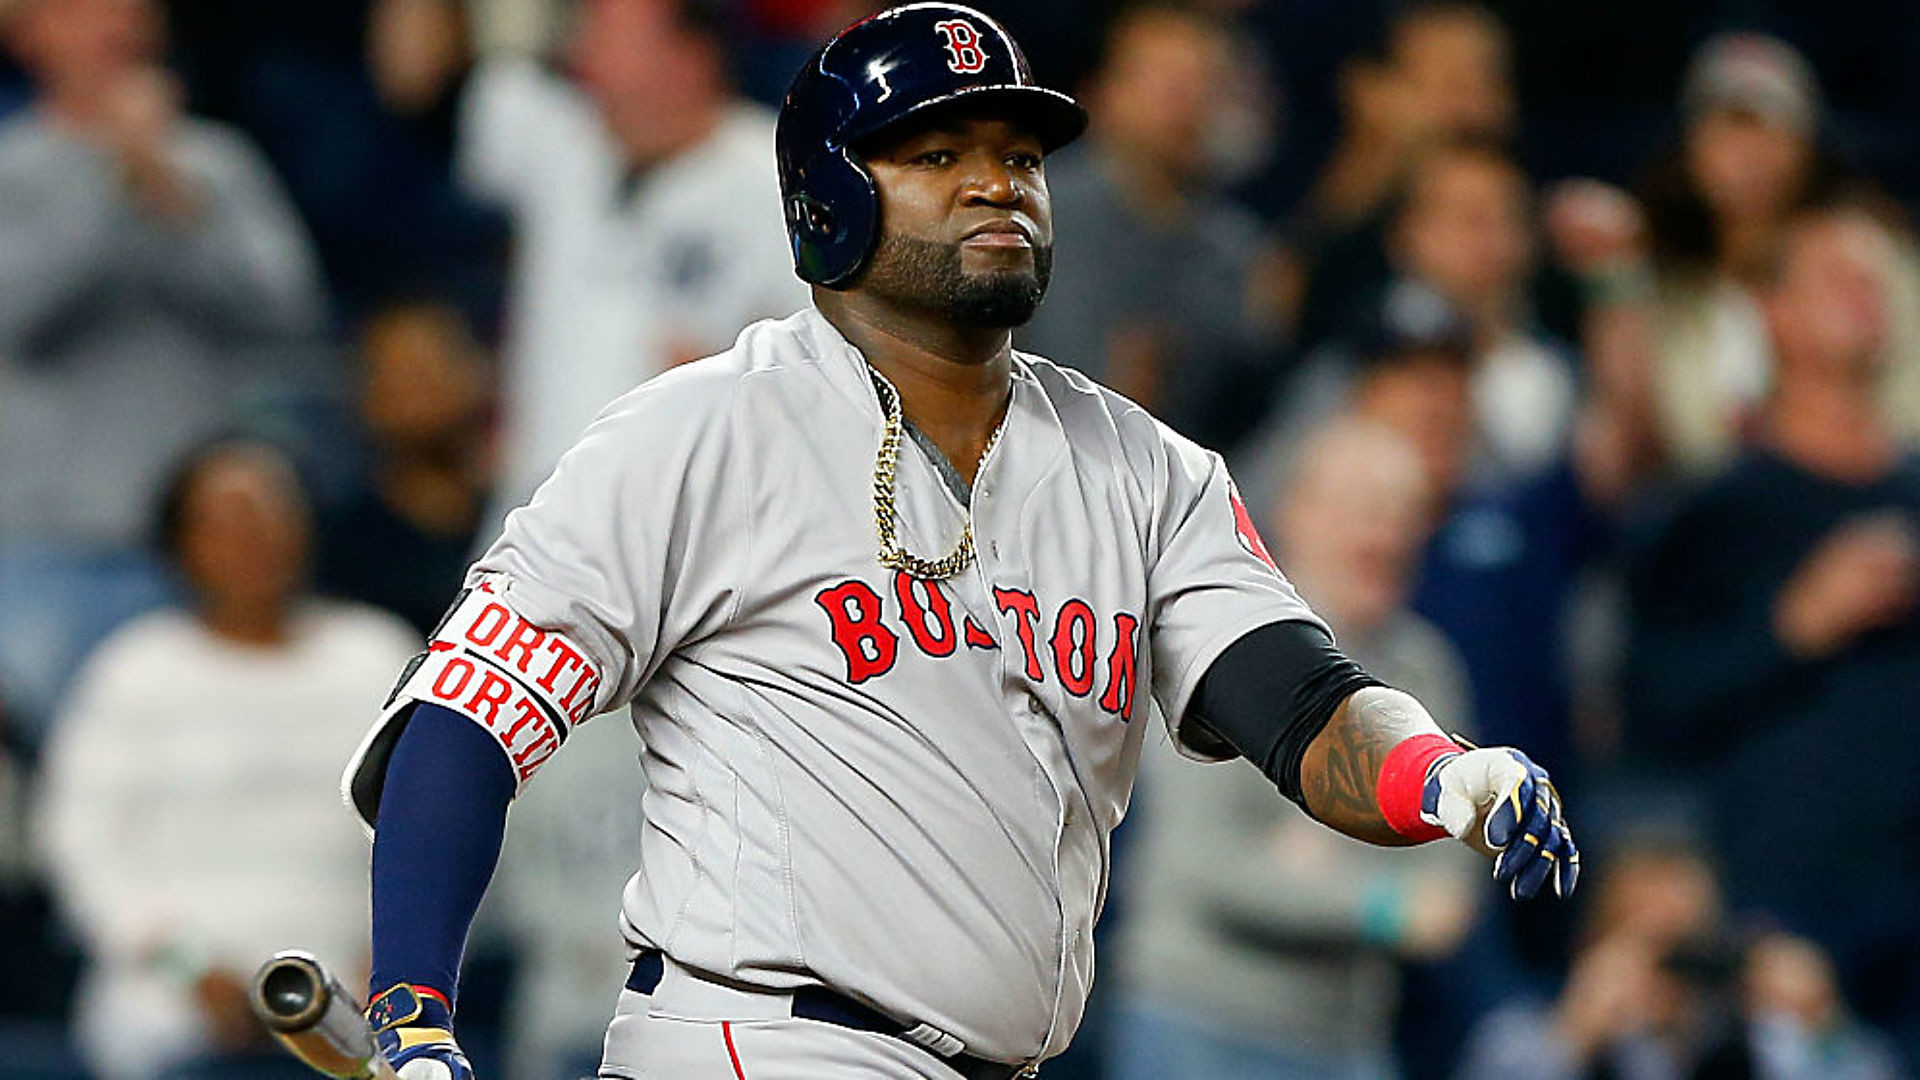 1920x1080 Even David Ortiz can't come through in the clutch all the time | MLB |  Sporting News